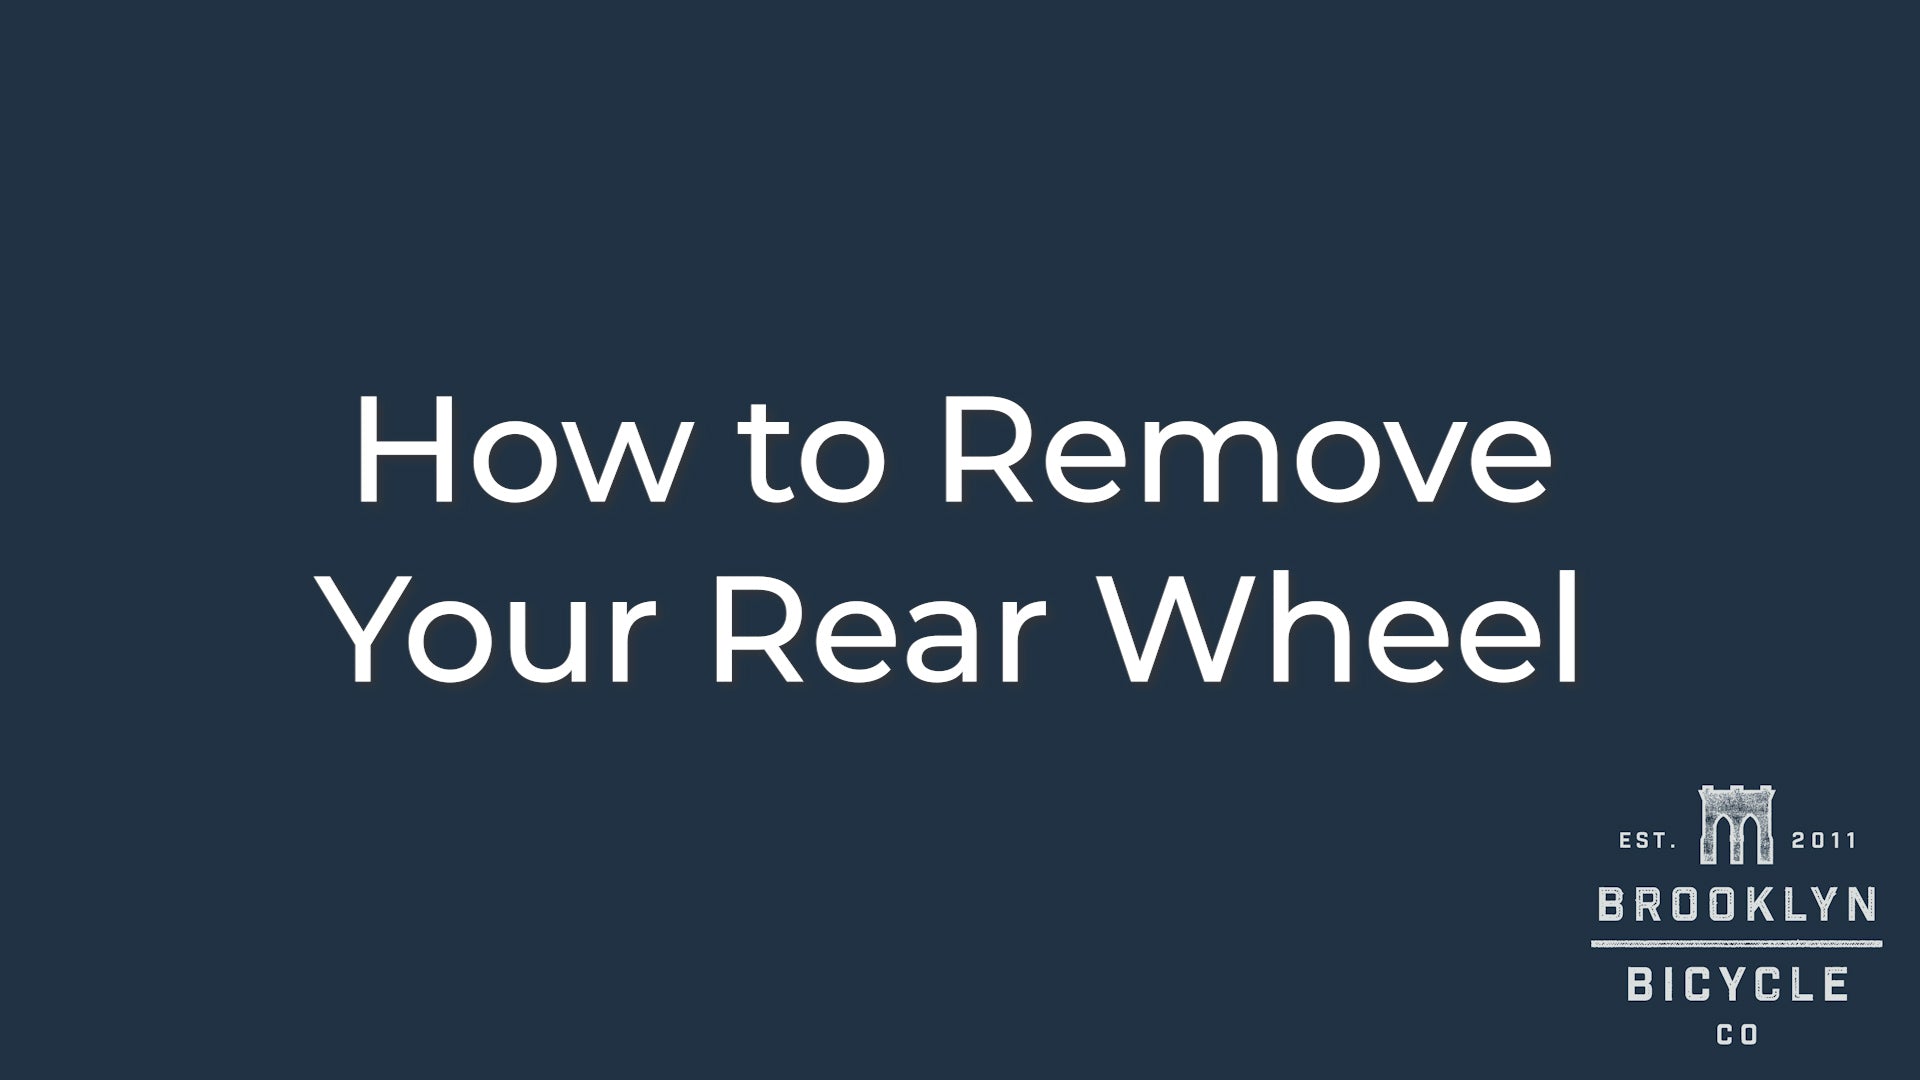 Video: How to Remove your Quick Release Rear Wheel